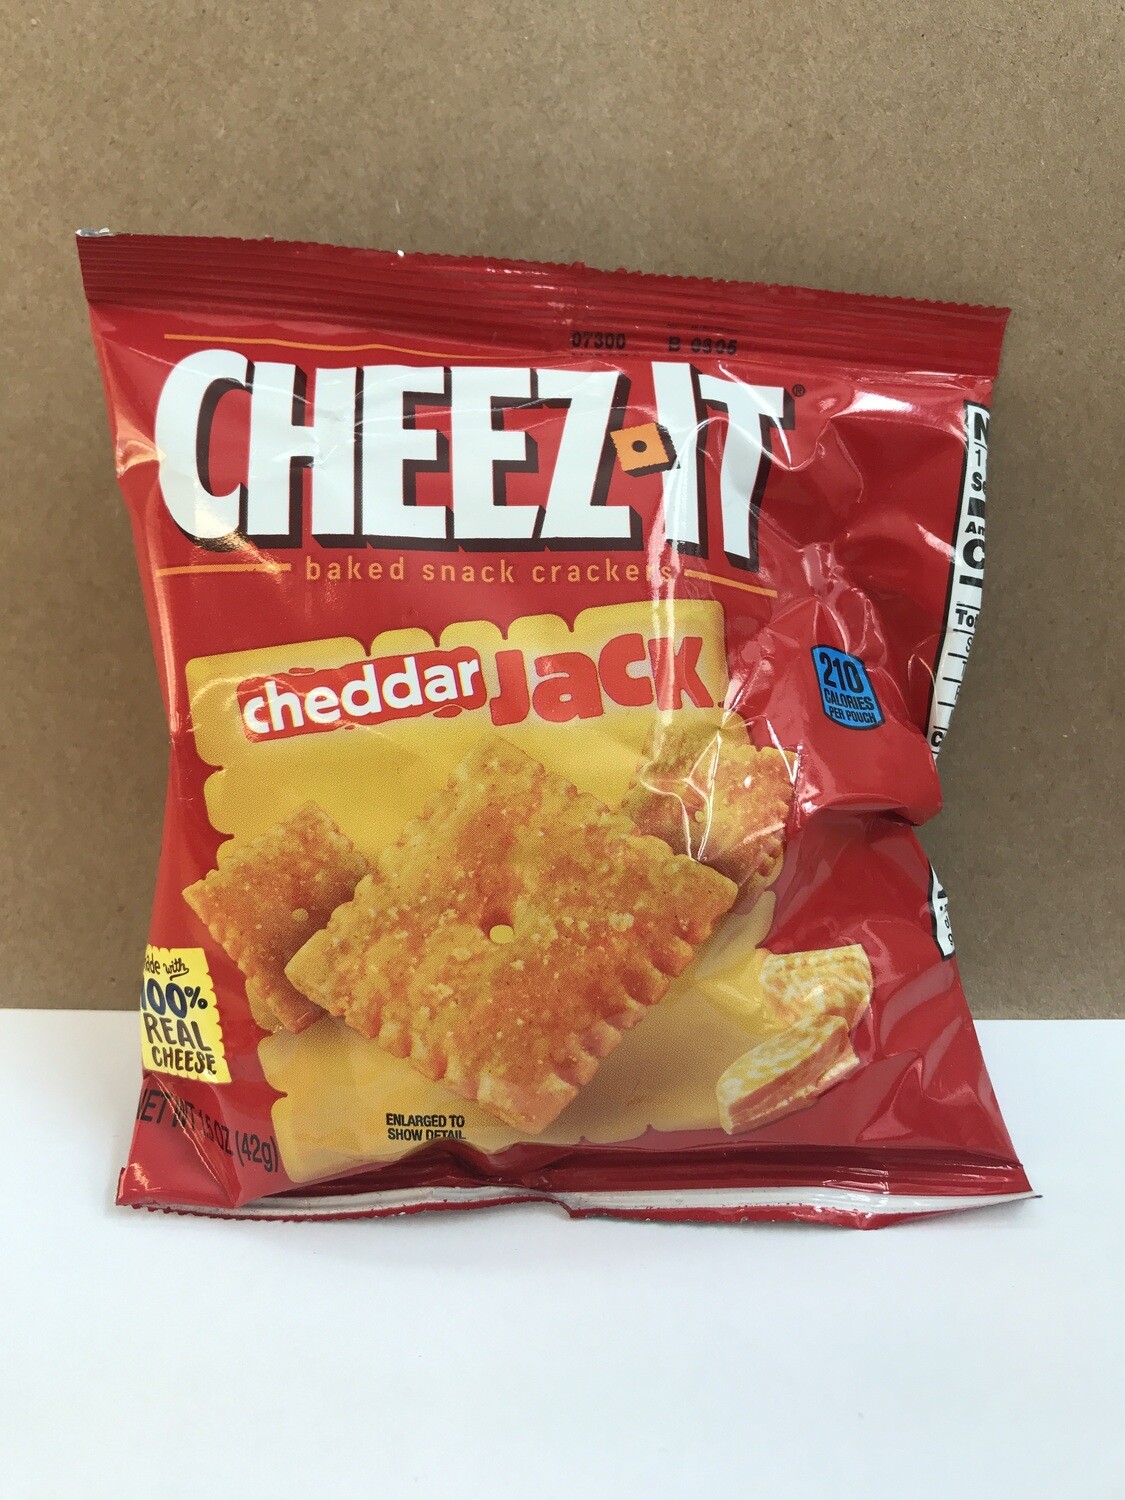 Chips / Mini Bag / Cheez it ched jack 1.5oz